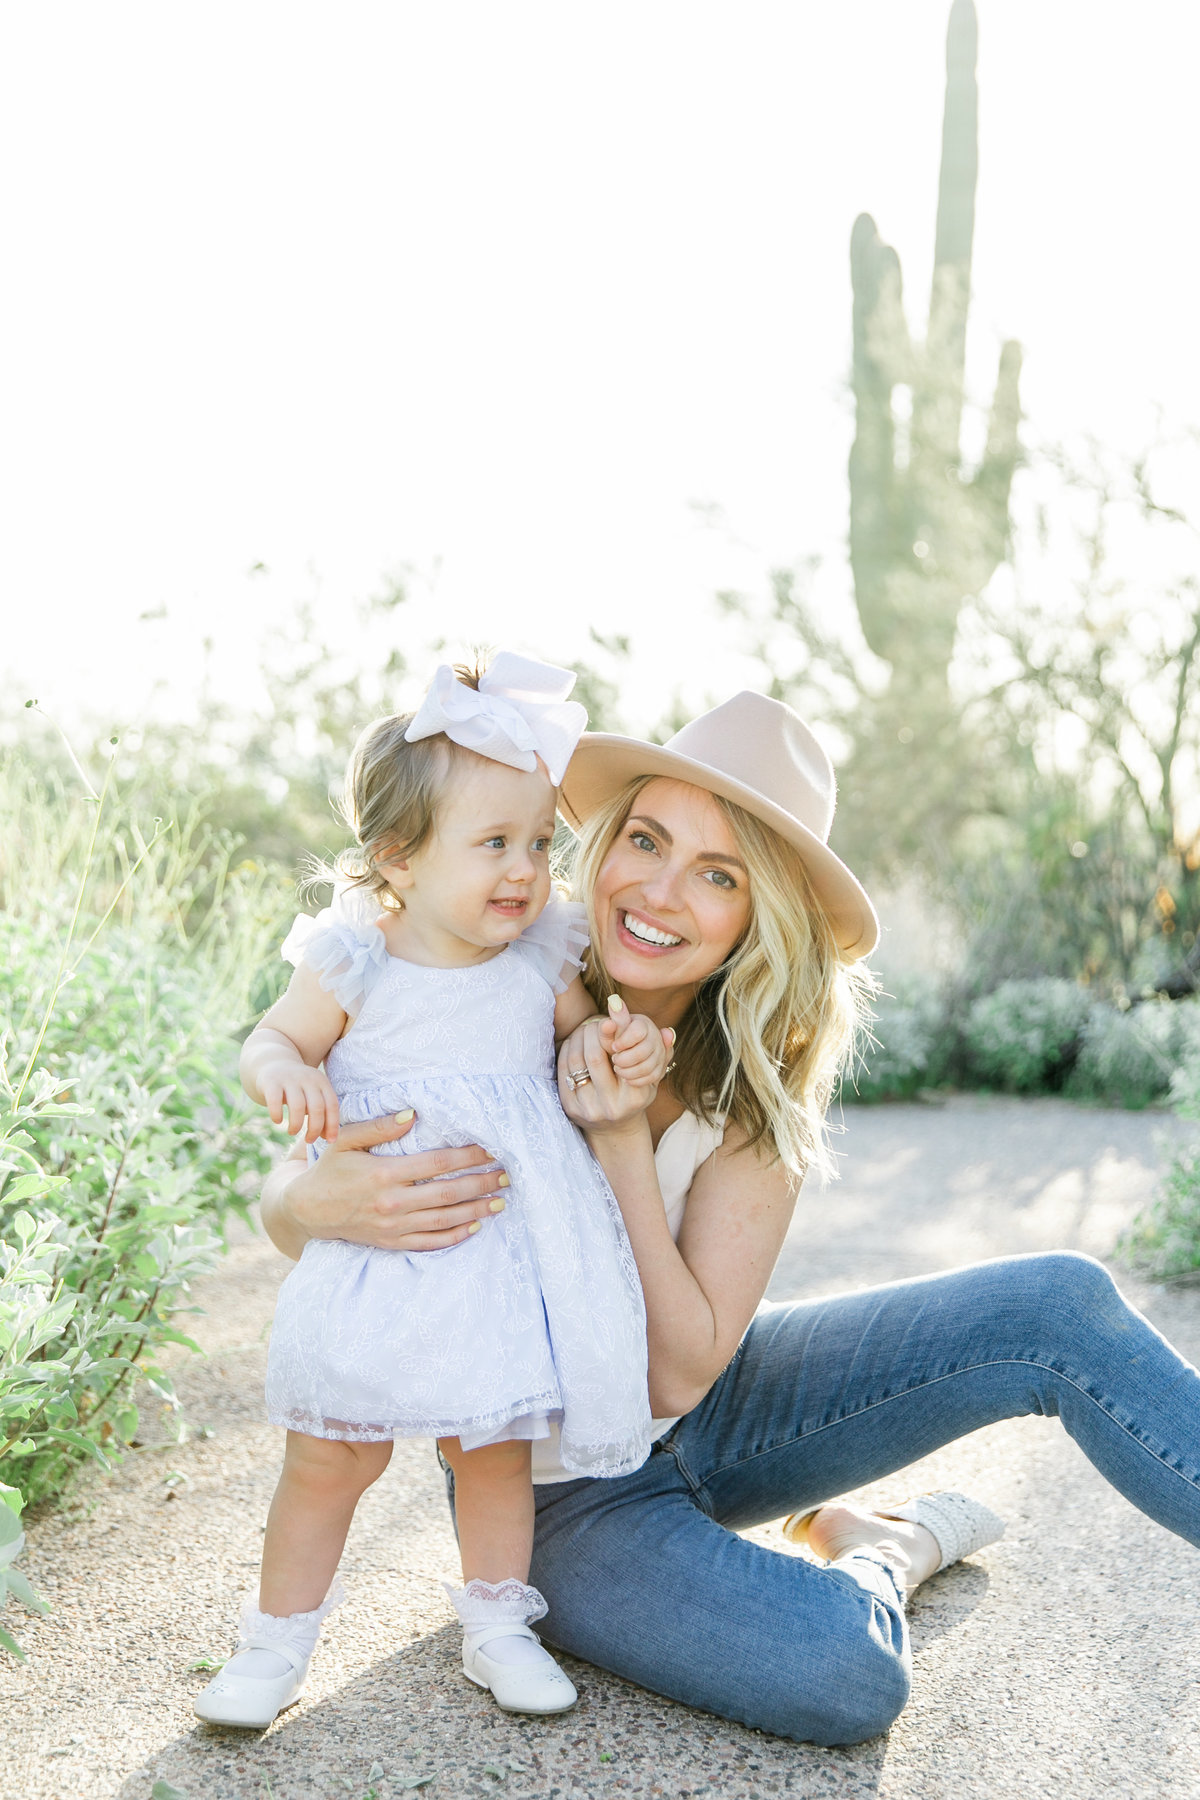 Karlie Colleen Photography - Scottsdale family photography - Dymin & family-84